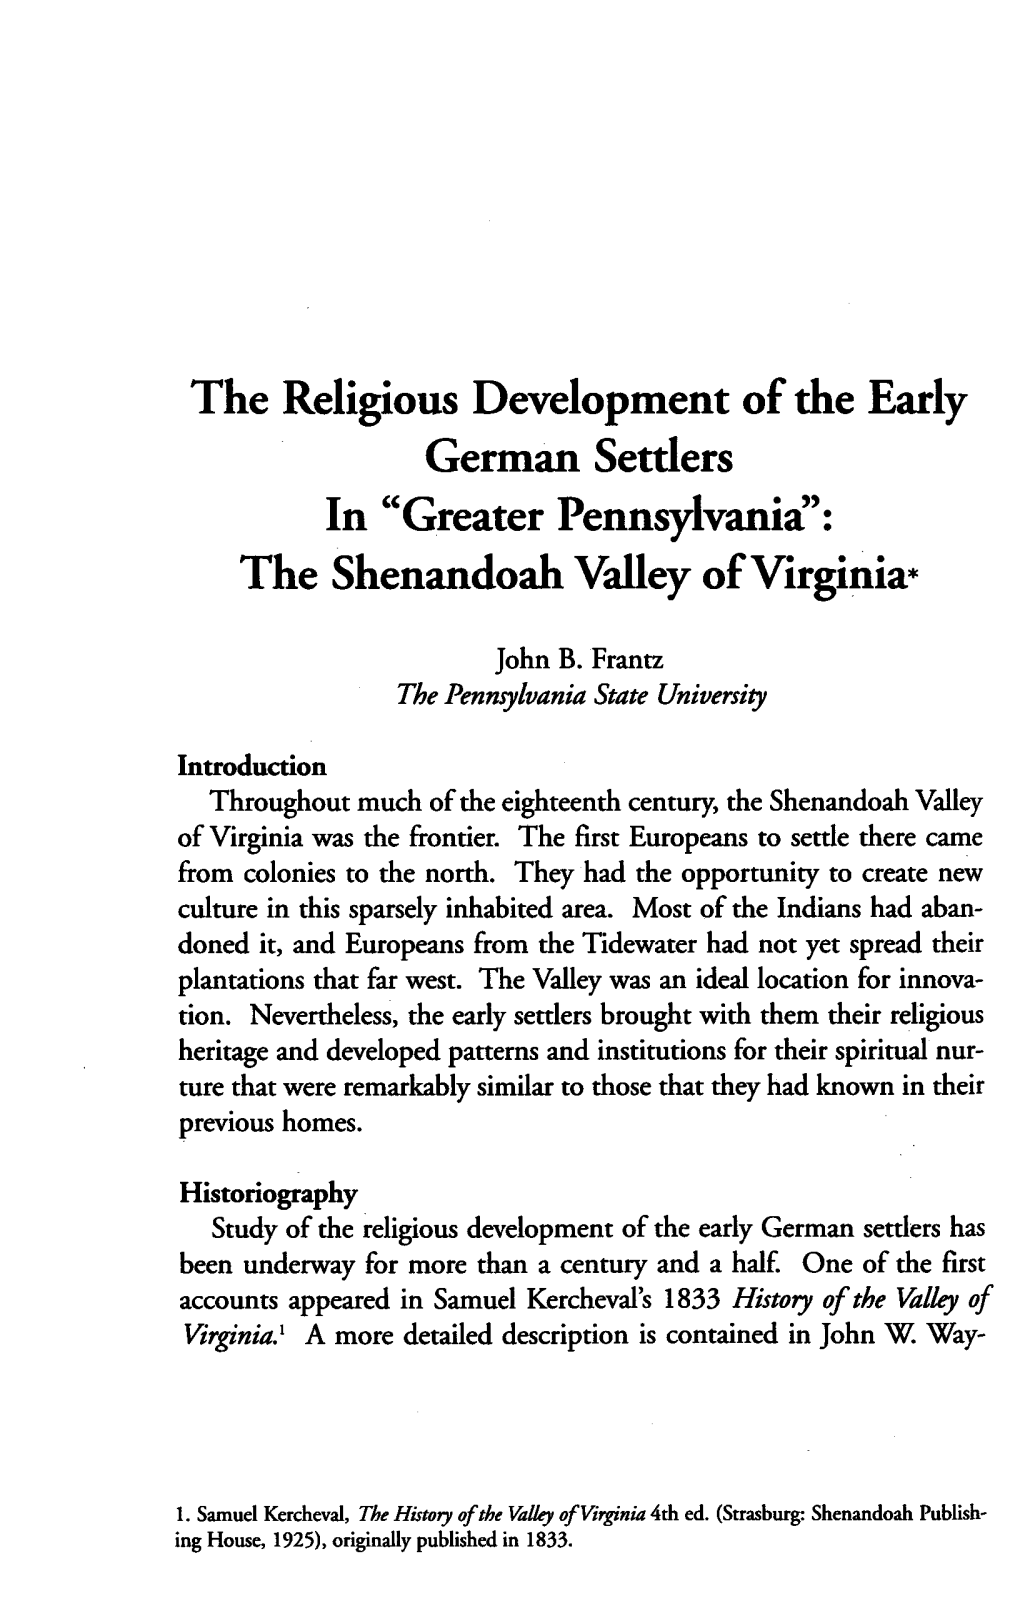 The Religious Development of the Early German Settlers in "Greater Pennsylvania": the Shenandoah Valley of Virginia*